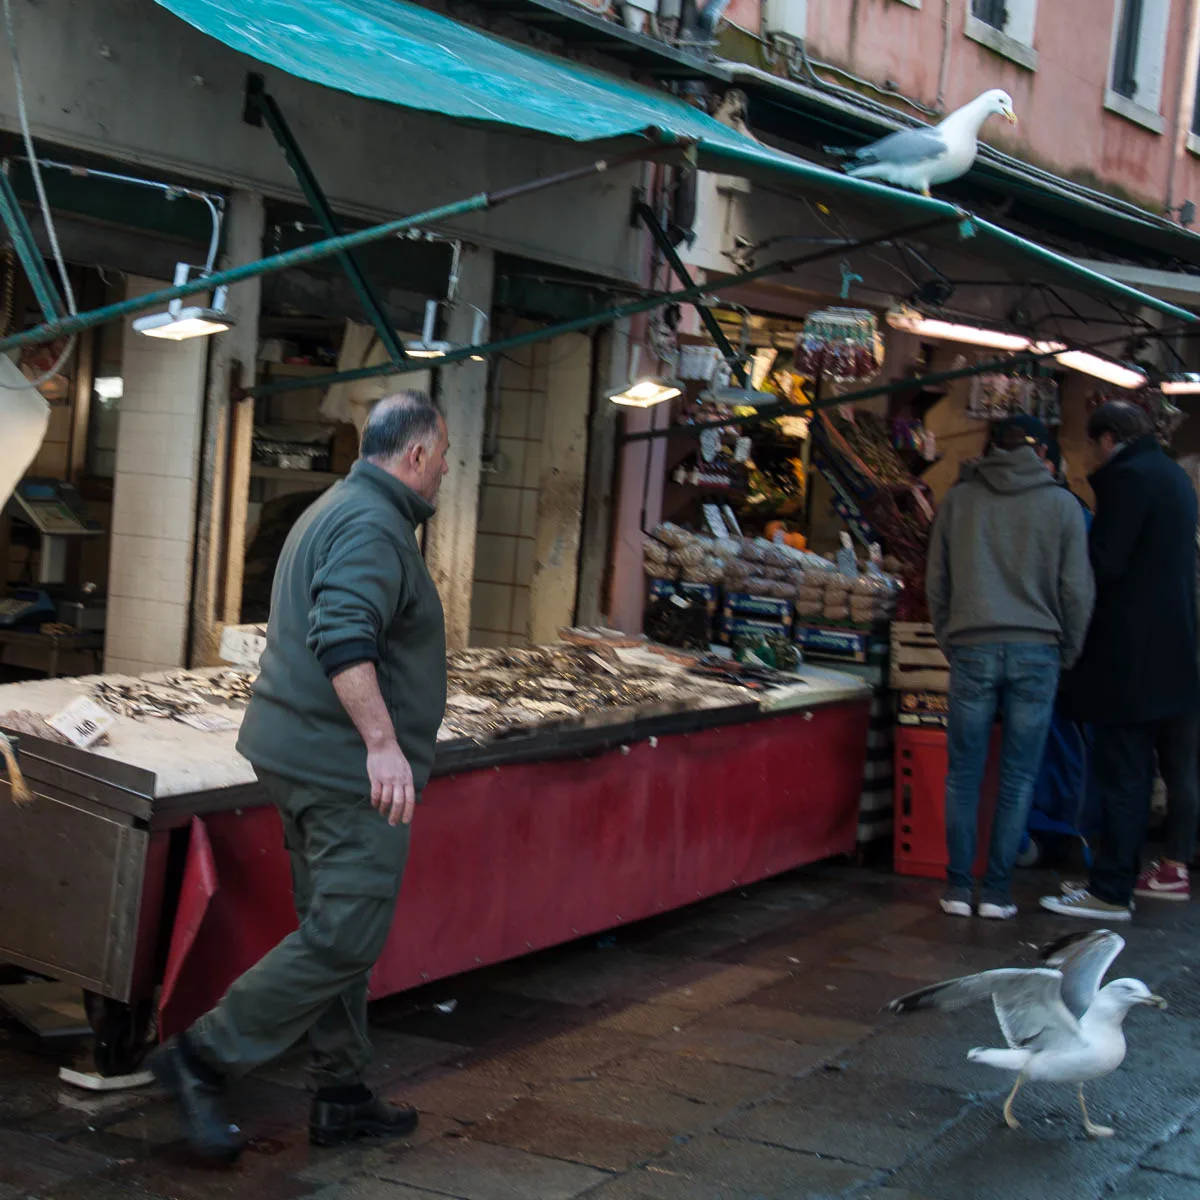 A fishmonger chases a seagull away from his stall - Rialto Fish Market, Venice, Italy - www.rossiwrites.com